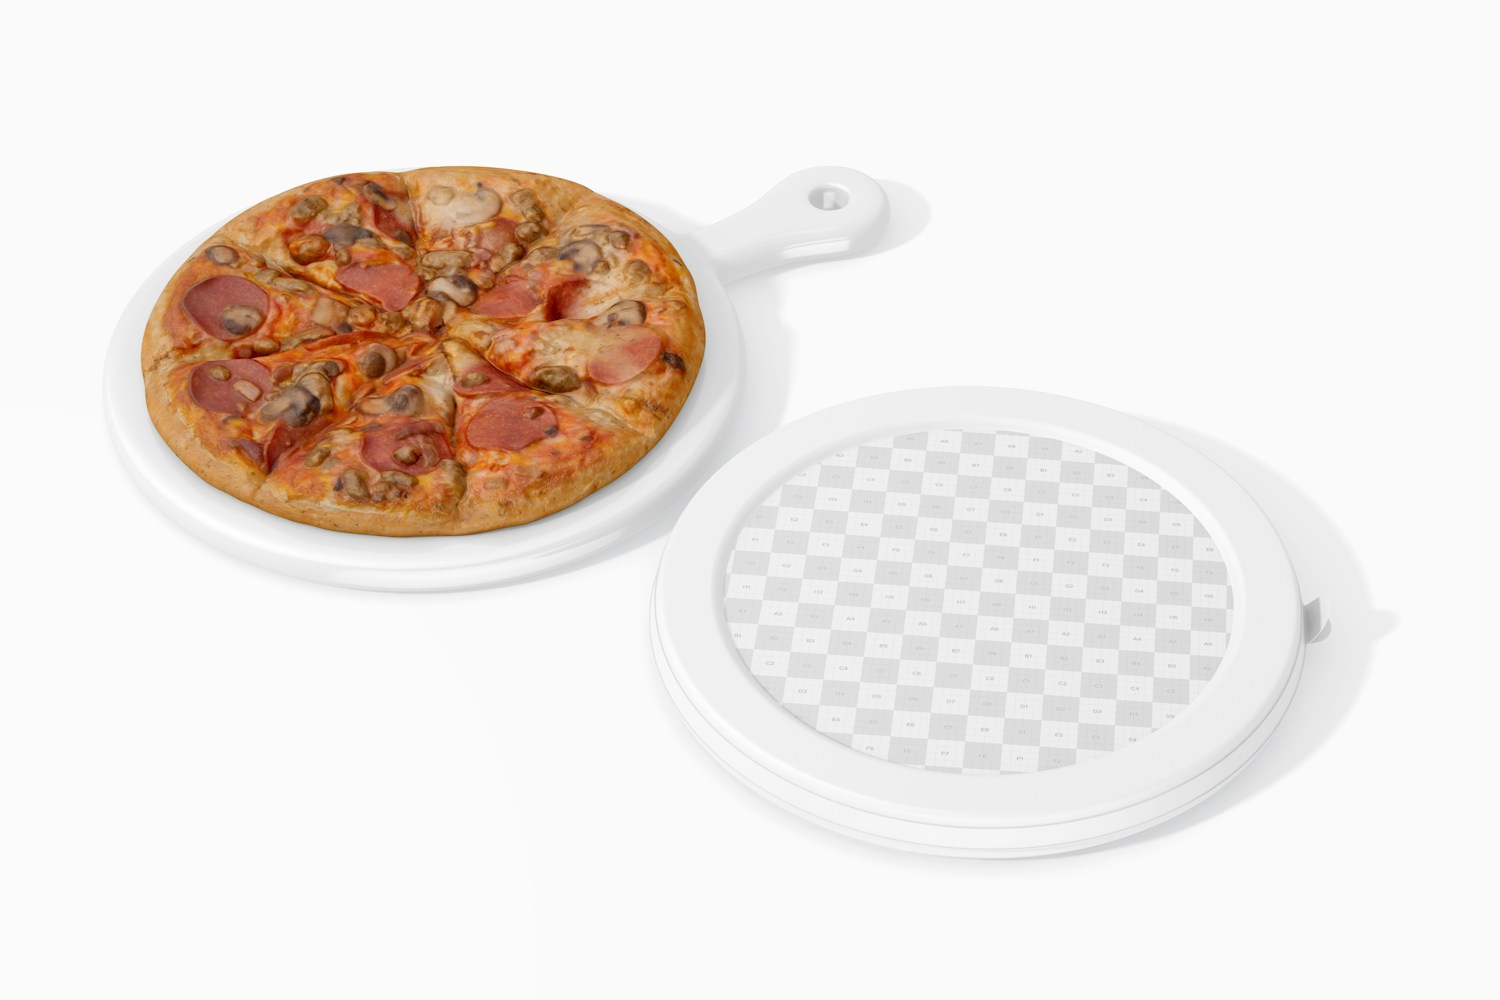 Round Pizza Packaging Mockup, Perspective